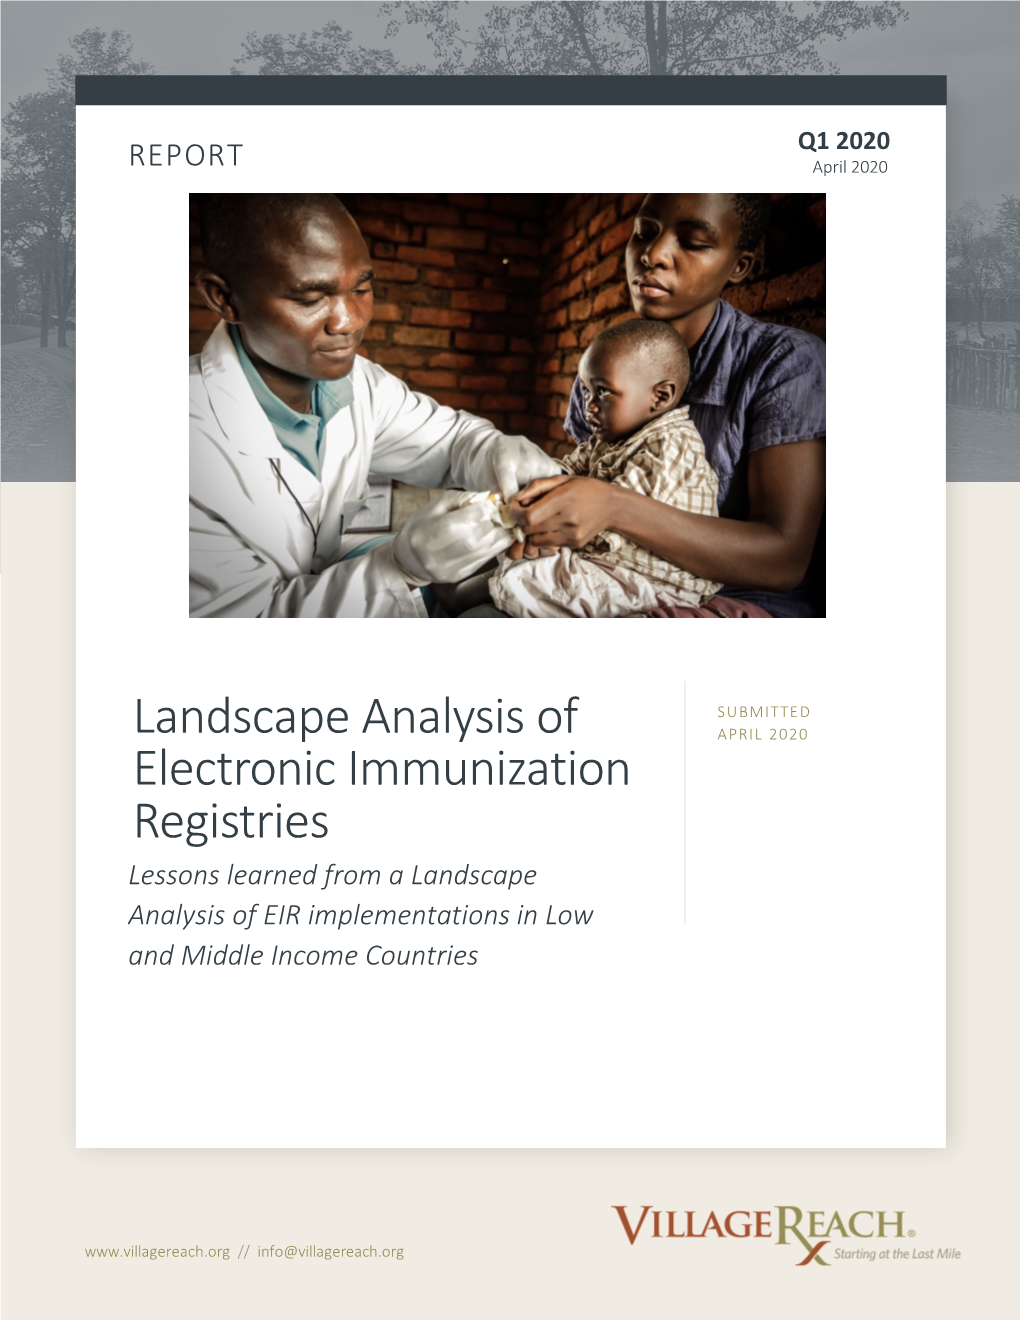 Landscape Analysis of Electronic Immunization Registries; Lessons Learned from a Landscape Analysis of EIR Implementations in Low and Middle Income Countries